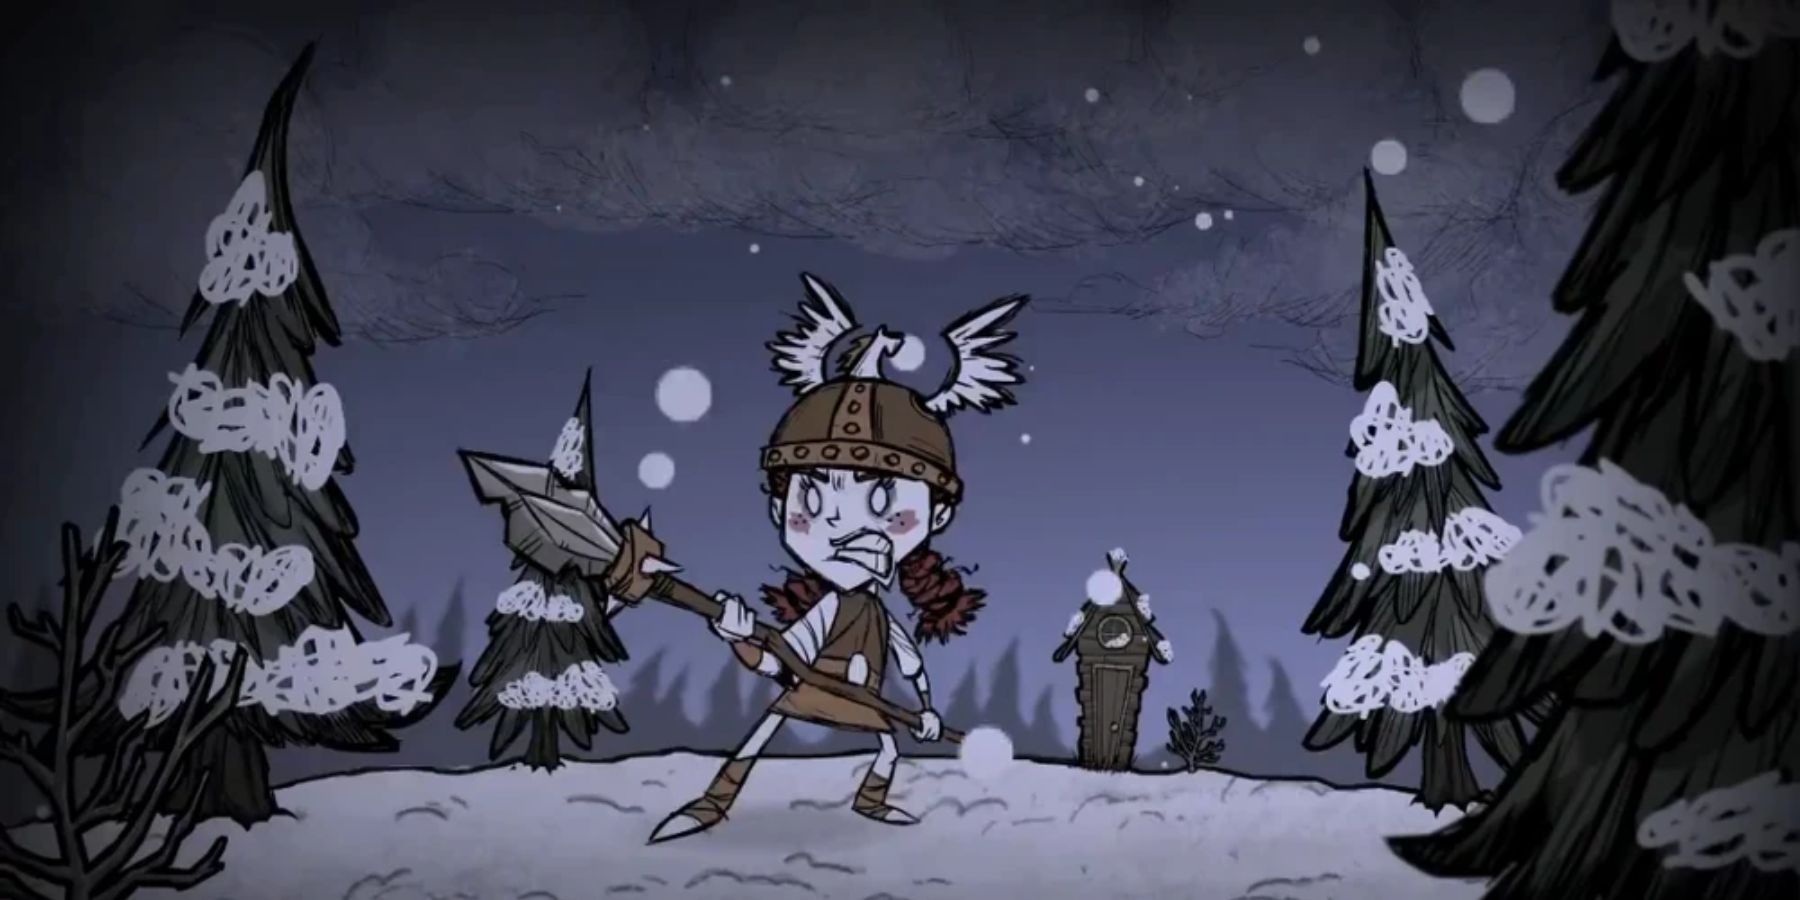 Ю донт фул. Don't Starve together Вигфрид. Вигфрид в don't Starve. Вигфрид don't Starve together Art. Вигфрид ДСТ.